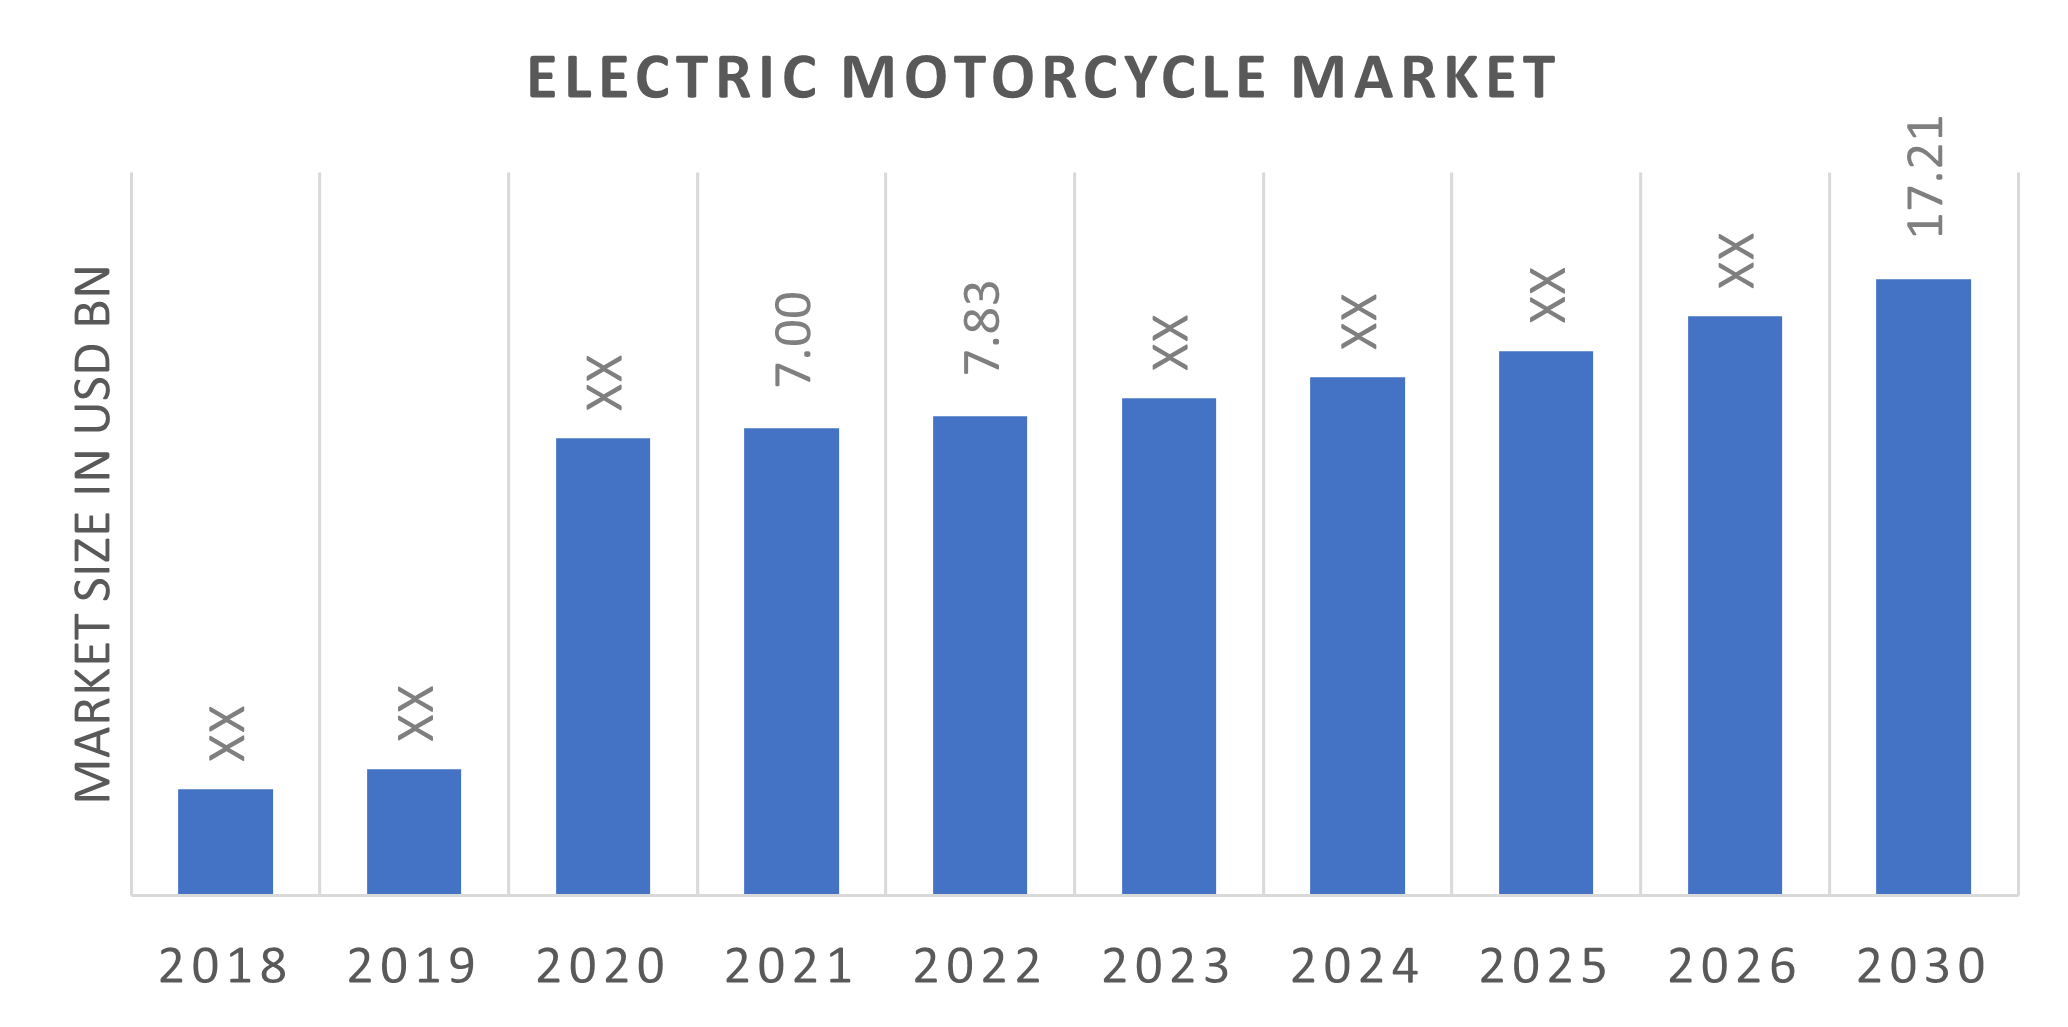 Global Electric Motorcycle Market Overview